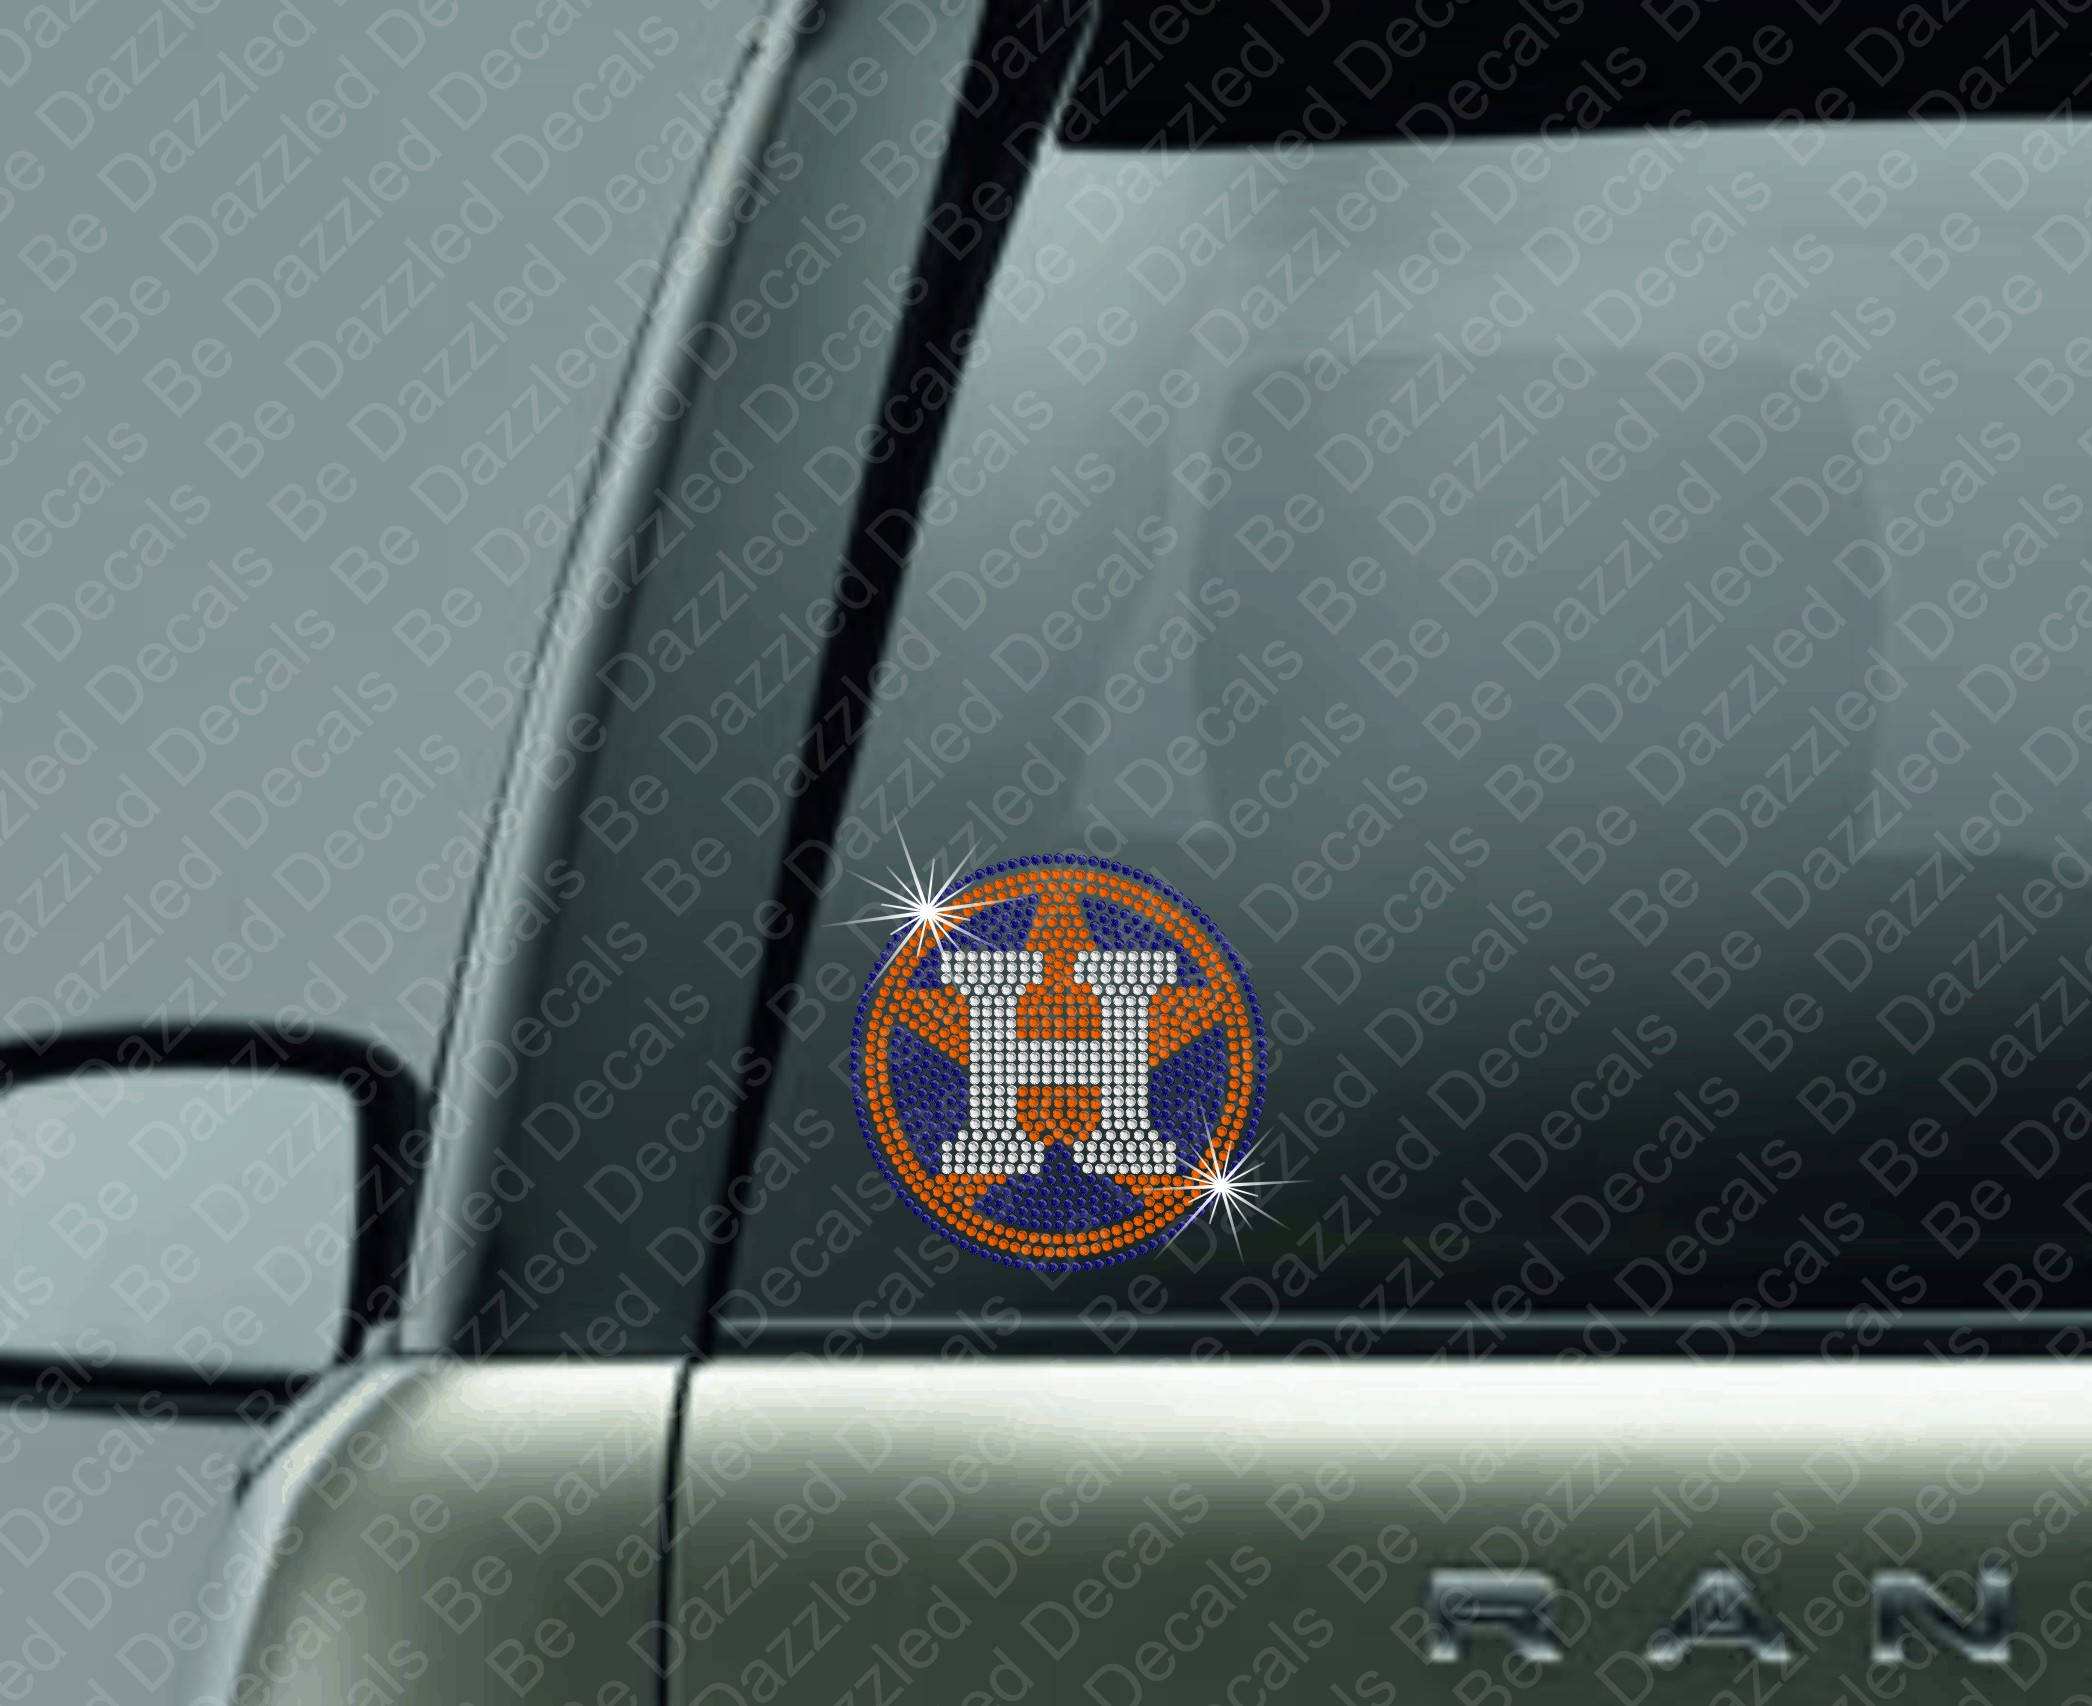 Houston Astros Logo (4.5 - 30) Vinyl Decal in Different colors & siz –  M&D Stickers